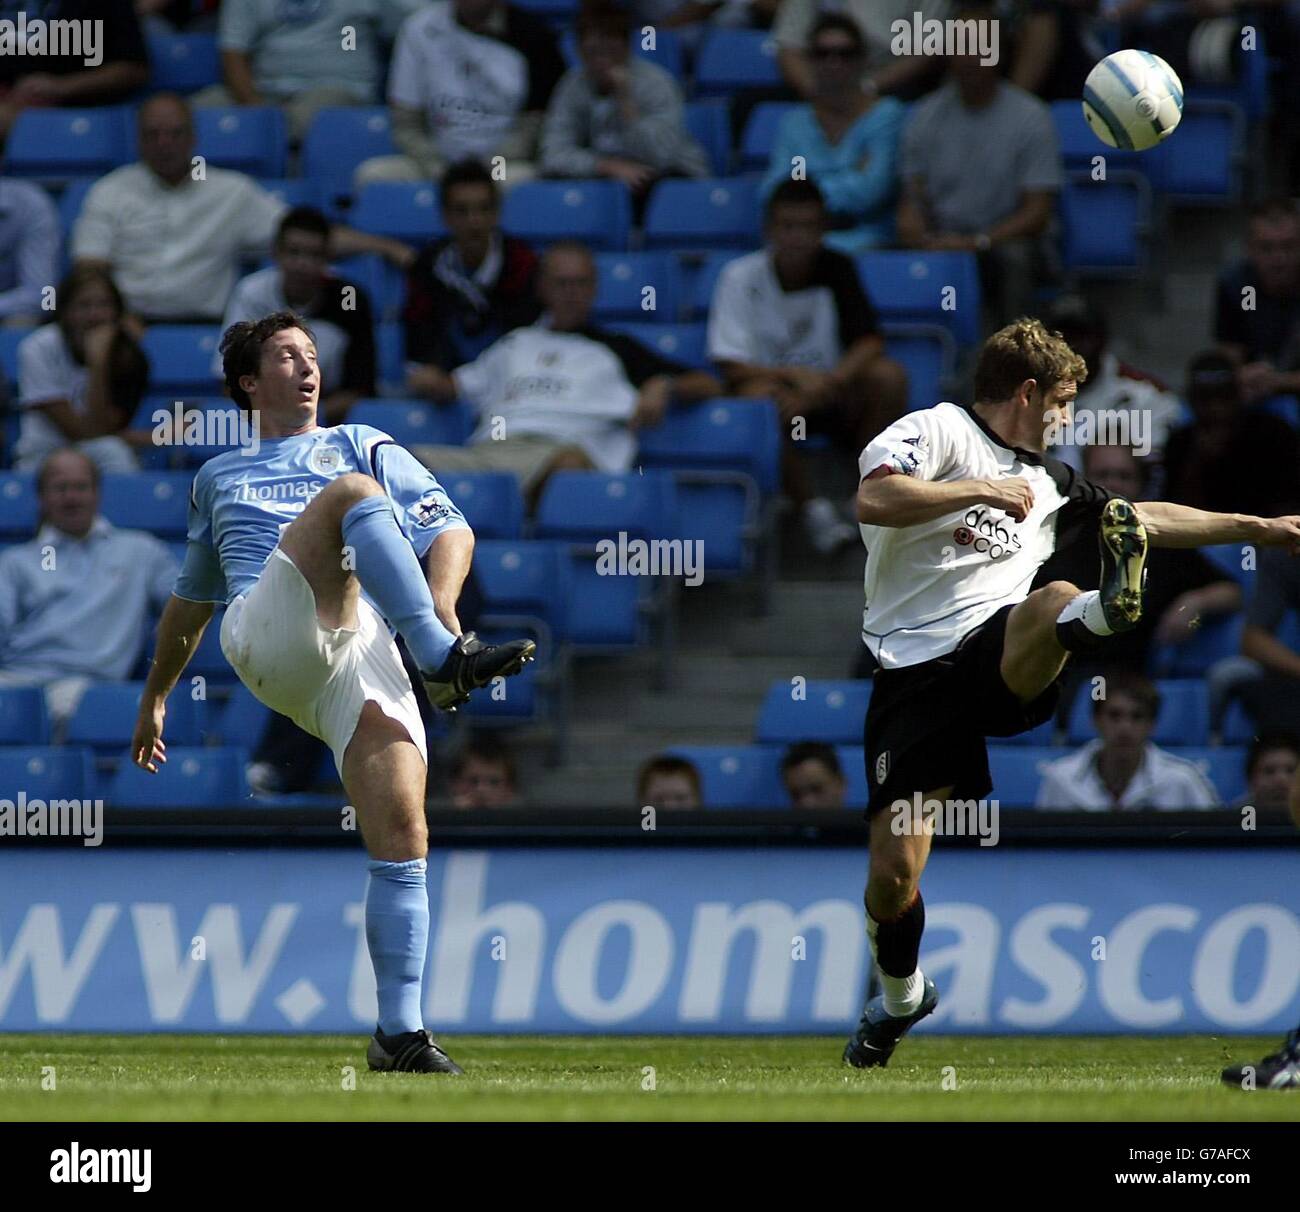 Manchester City's Robbie Fowler (left) scores the opening goal against Fulham during their Barclays Premiership match at the City of Manchester Stadium, Manchester, Saturday August 14, 2004. Stock Photo